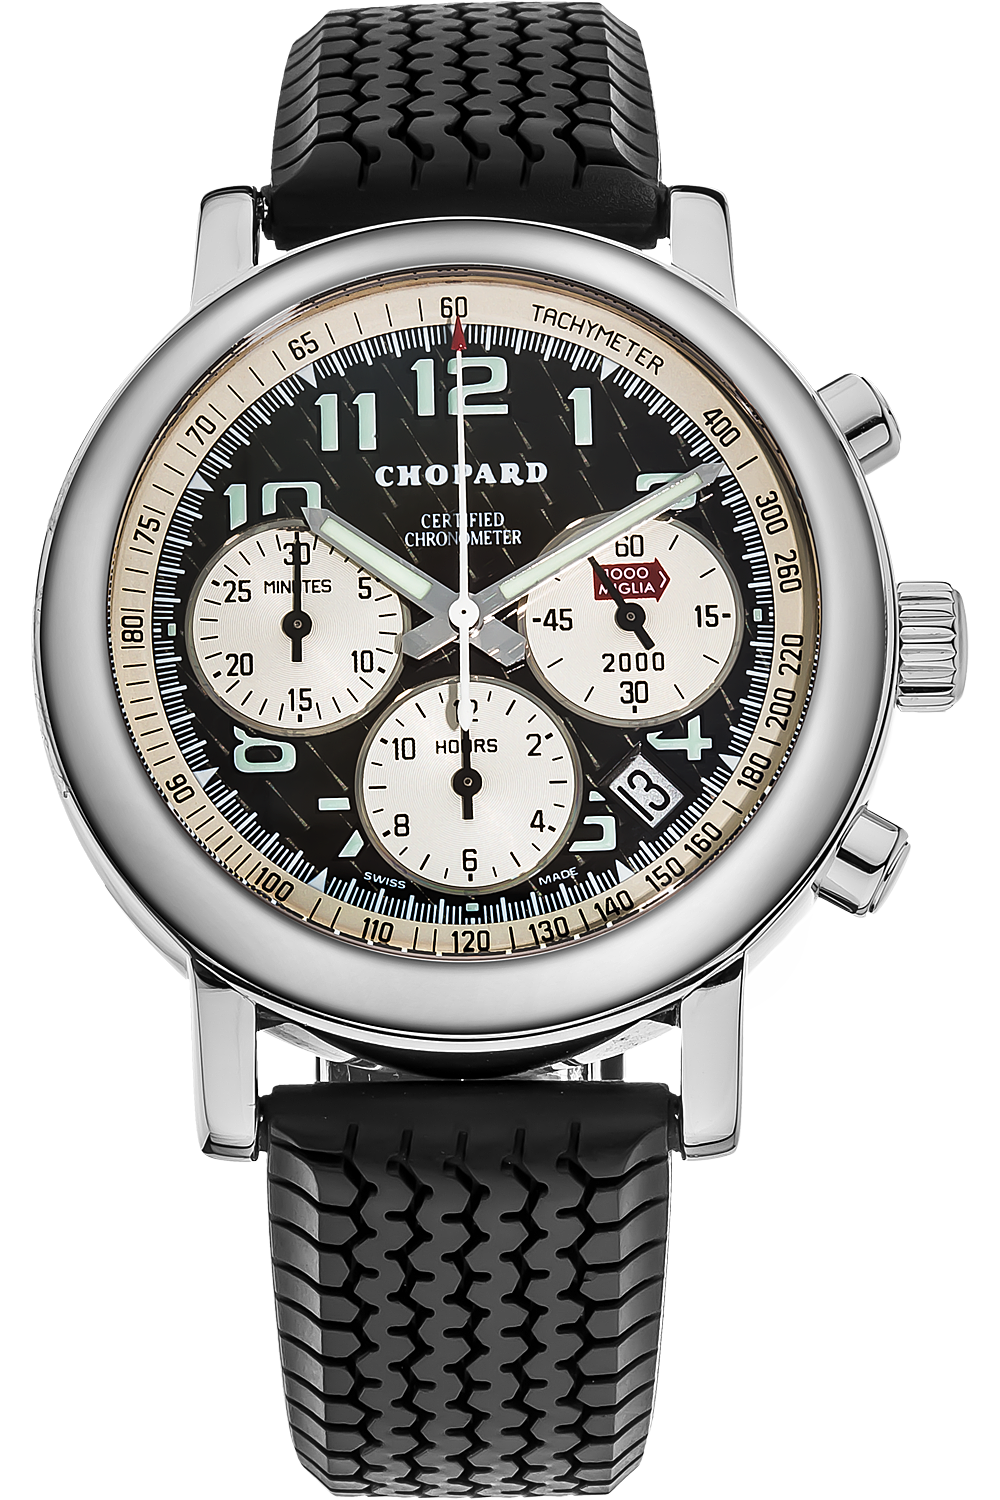 Buy the latest luxury watches from Chopard/Mille Miglia now!